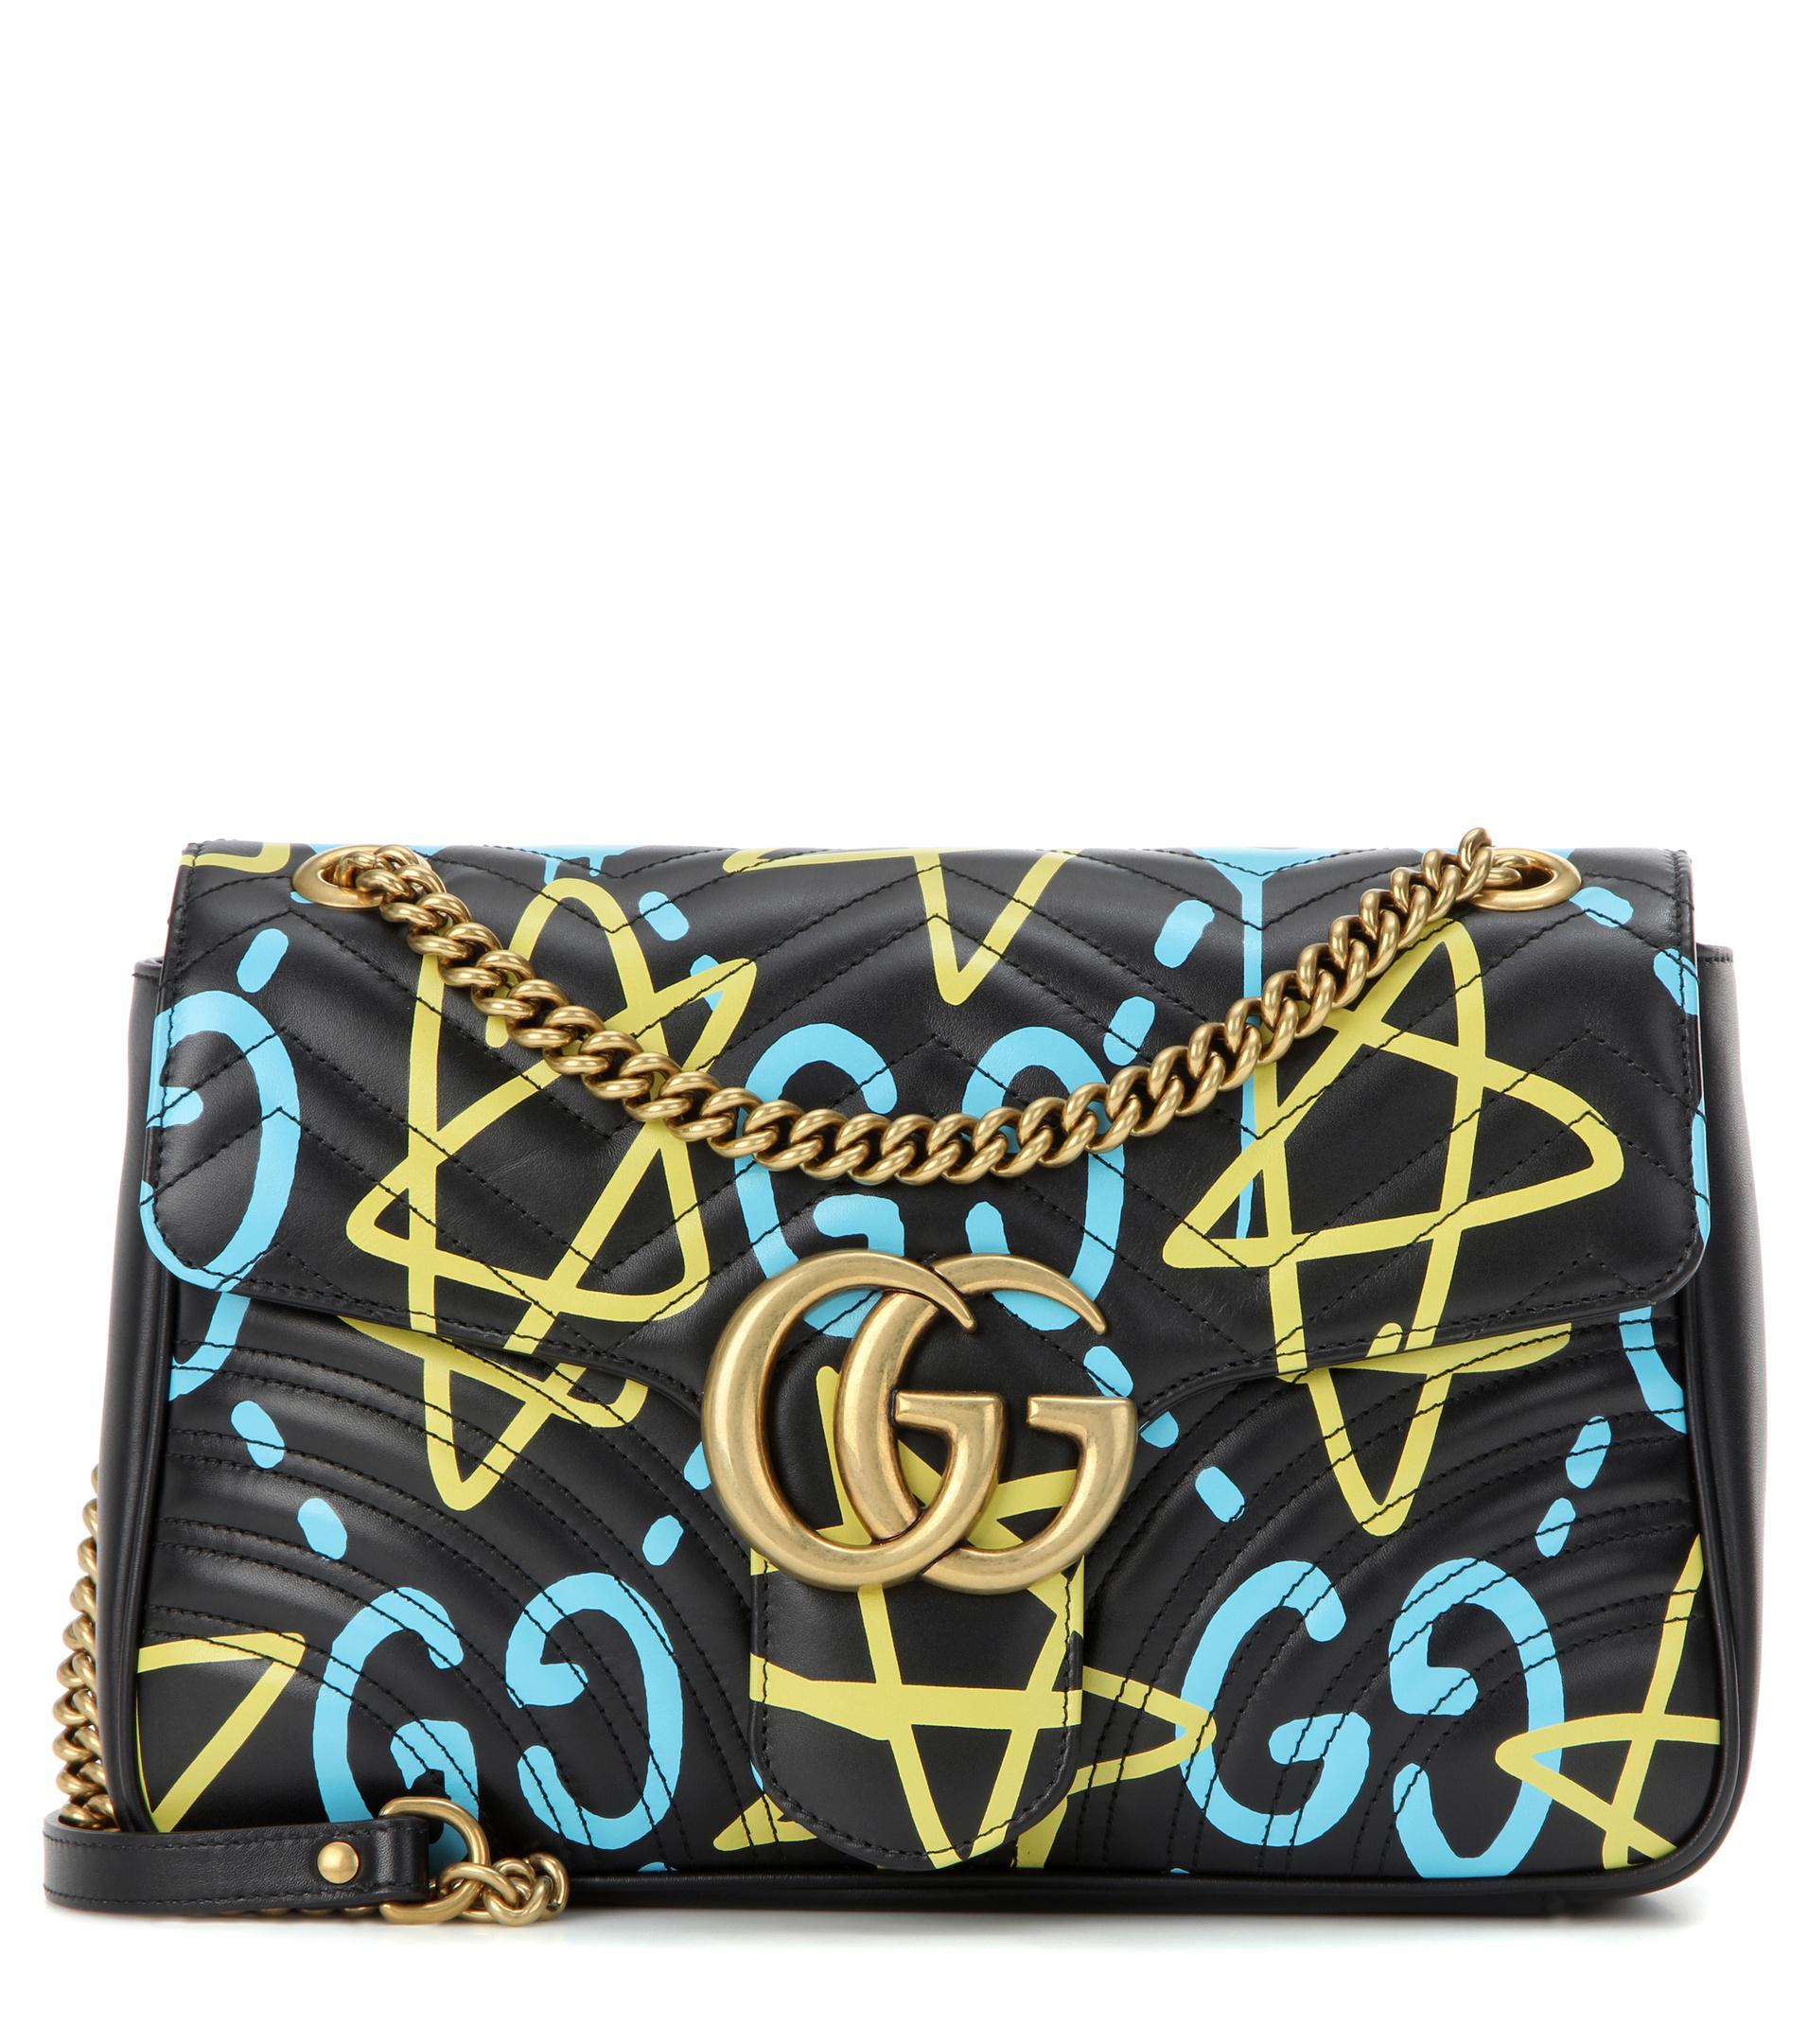 Gucci Ghost Gg Marmont Medium Leather Shoulder Bag in Black - Lyst